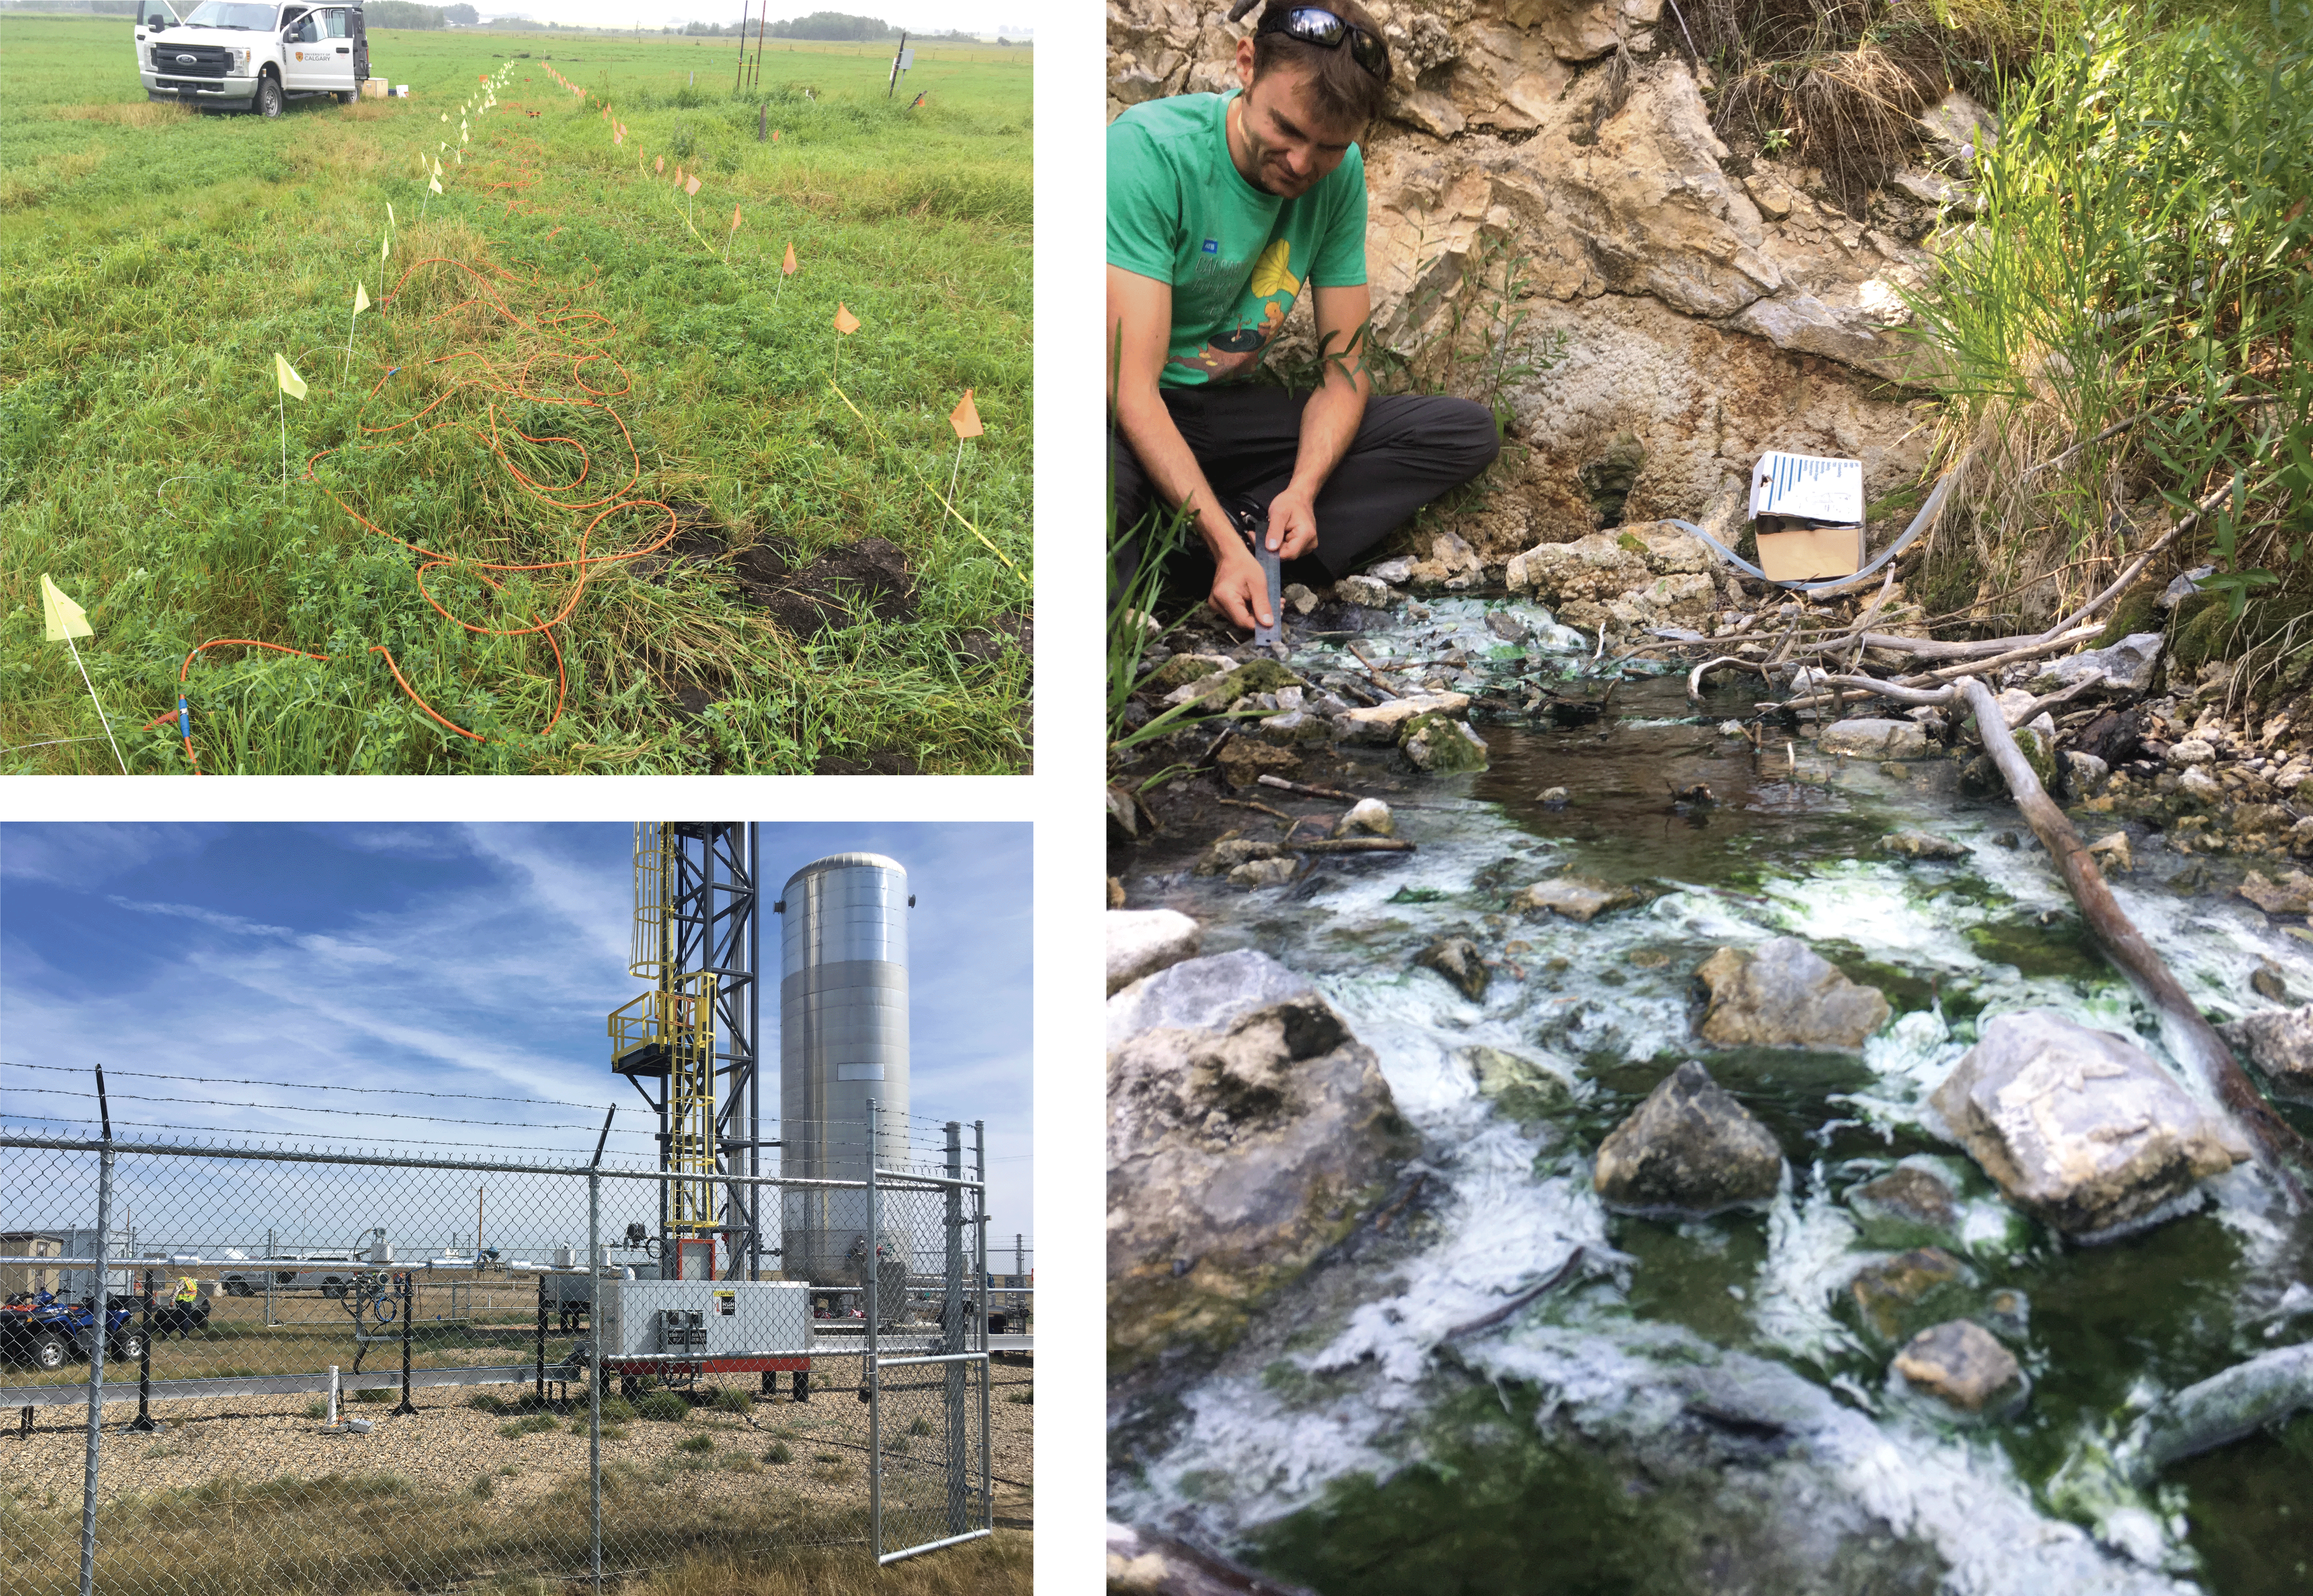 Upperleft: ERT lines collected to image soap hole plumbing. Lowerleft: CO2 injection site near Brooks, AB where U Calgary runs its geophysics field school. Right: PhD student Tom Wilson sampling geothermal water in Banff National Park. The white stuff is algea!